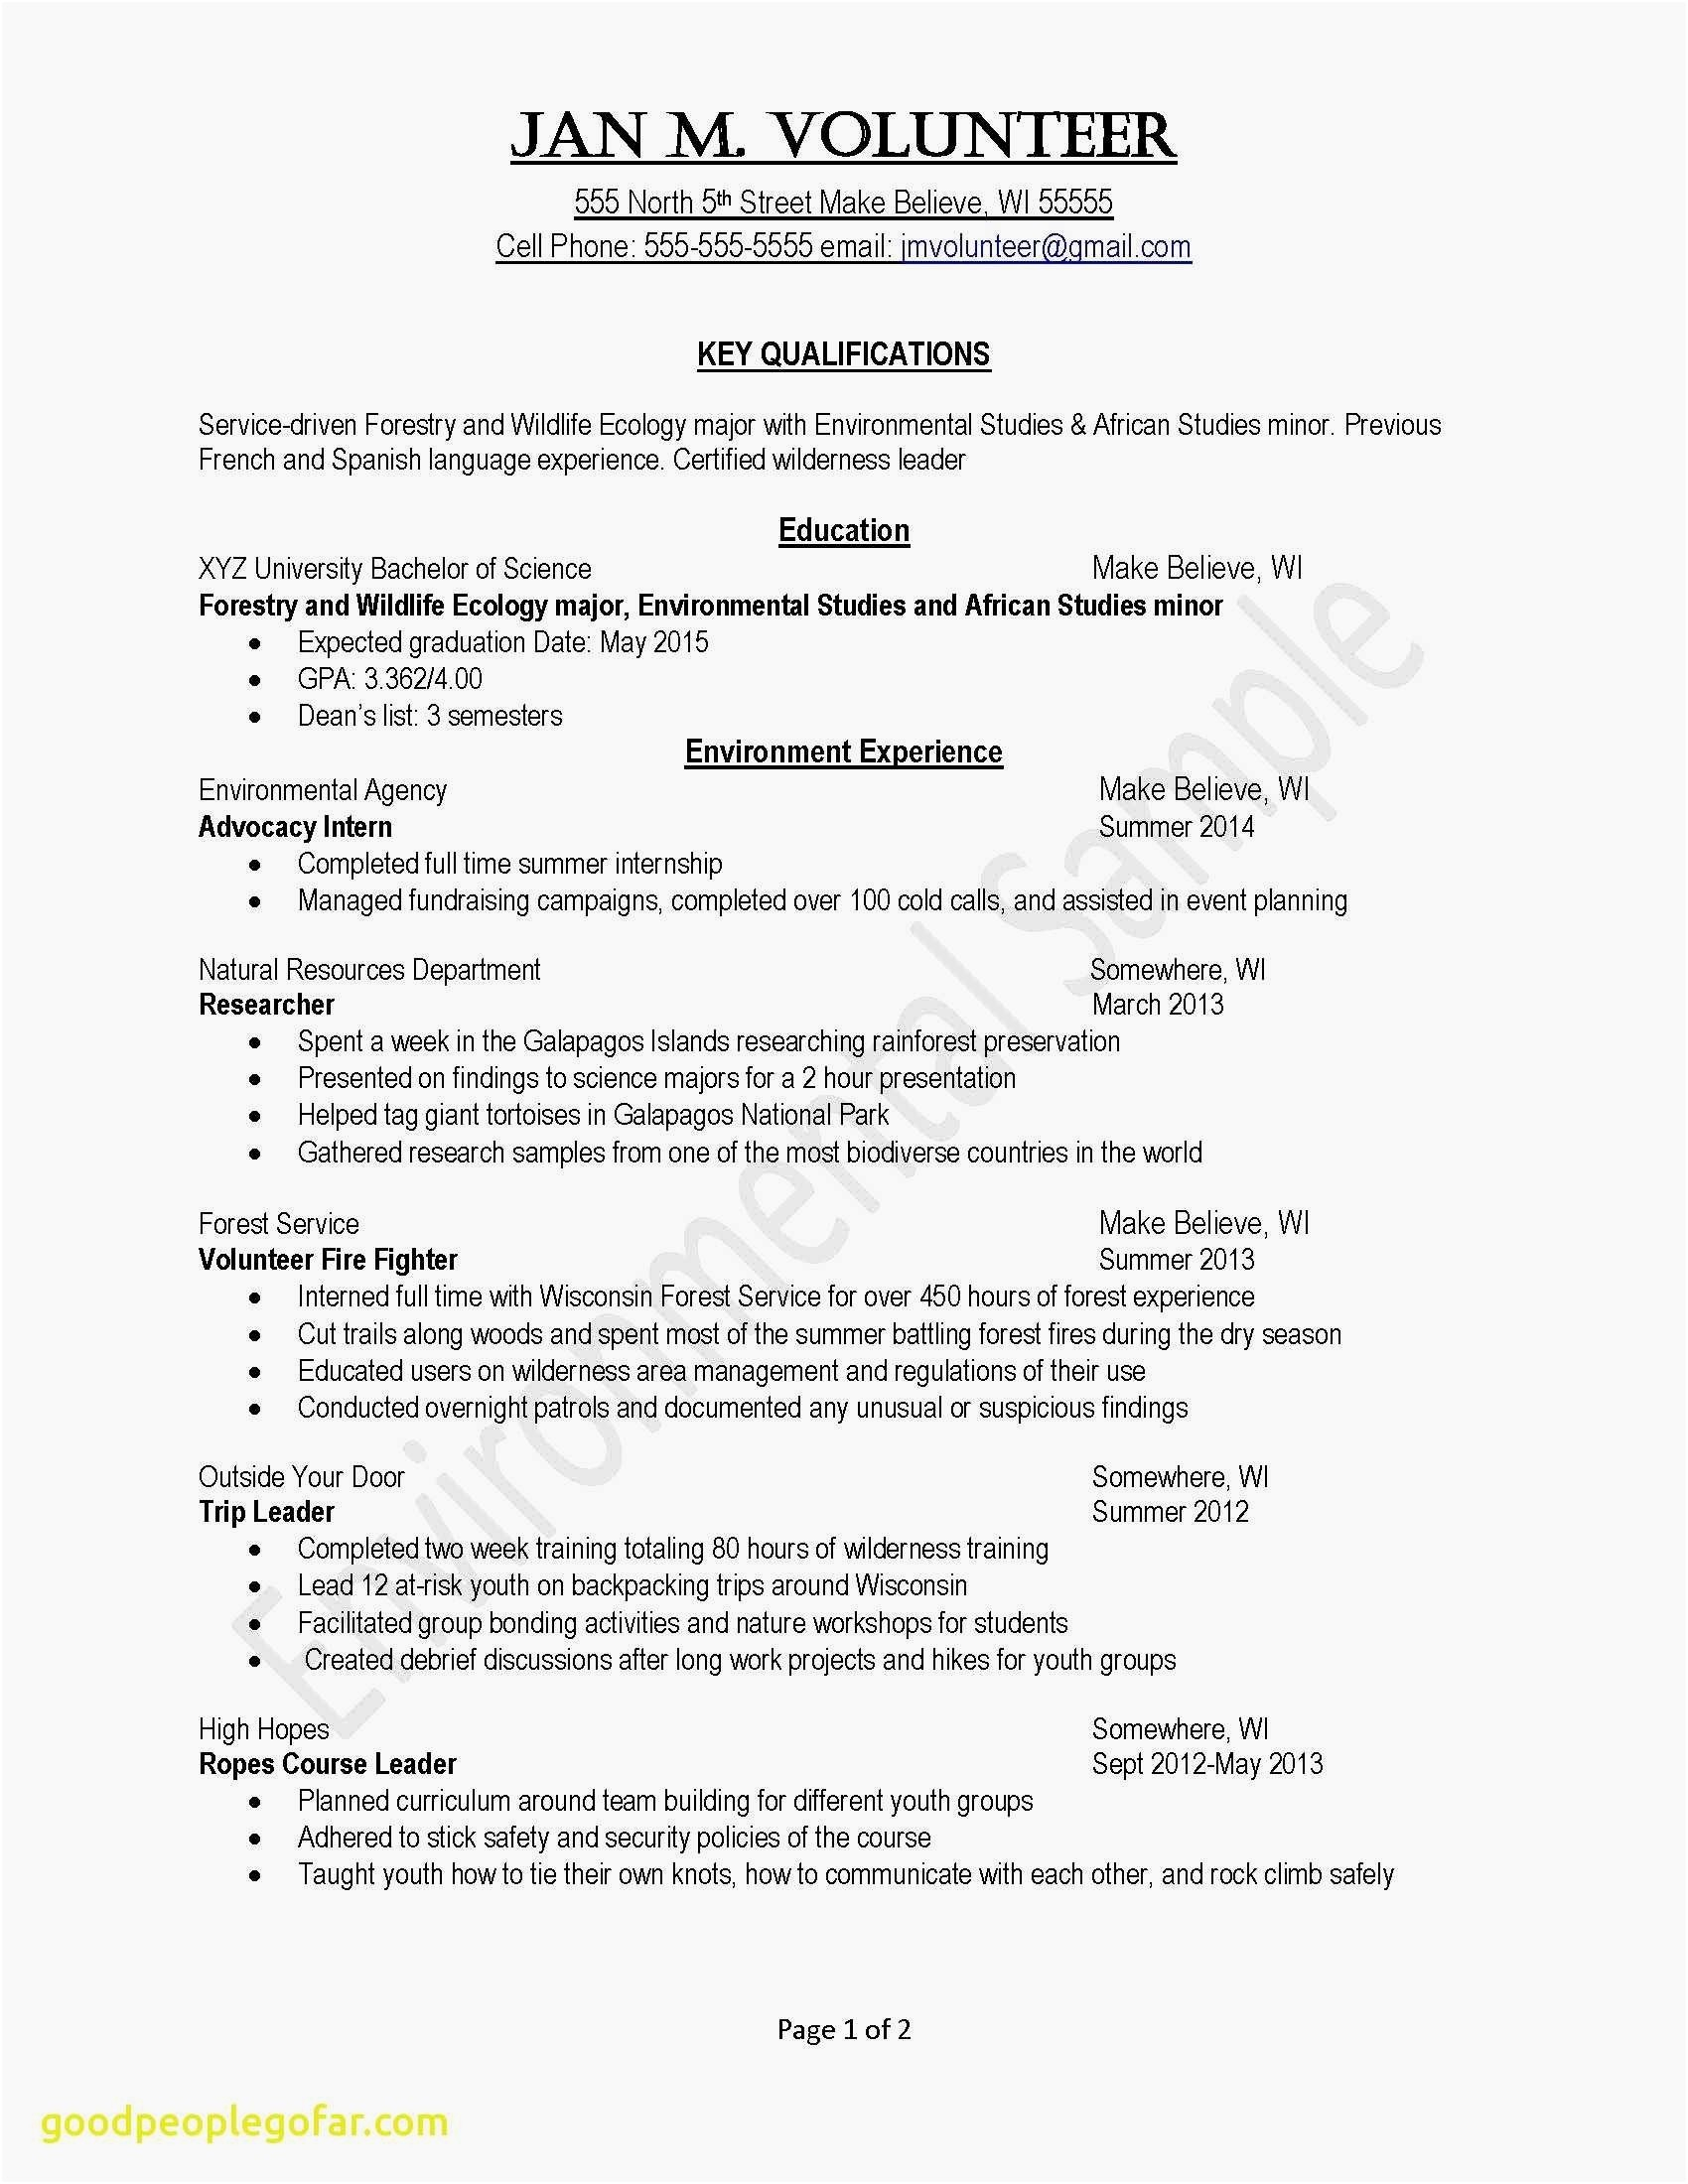 Email Template for Letter Of Recommendation - Cold Calling Email Template